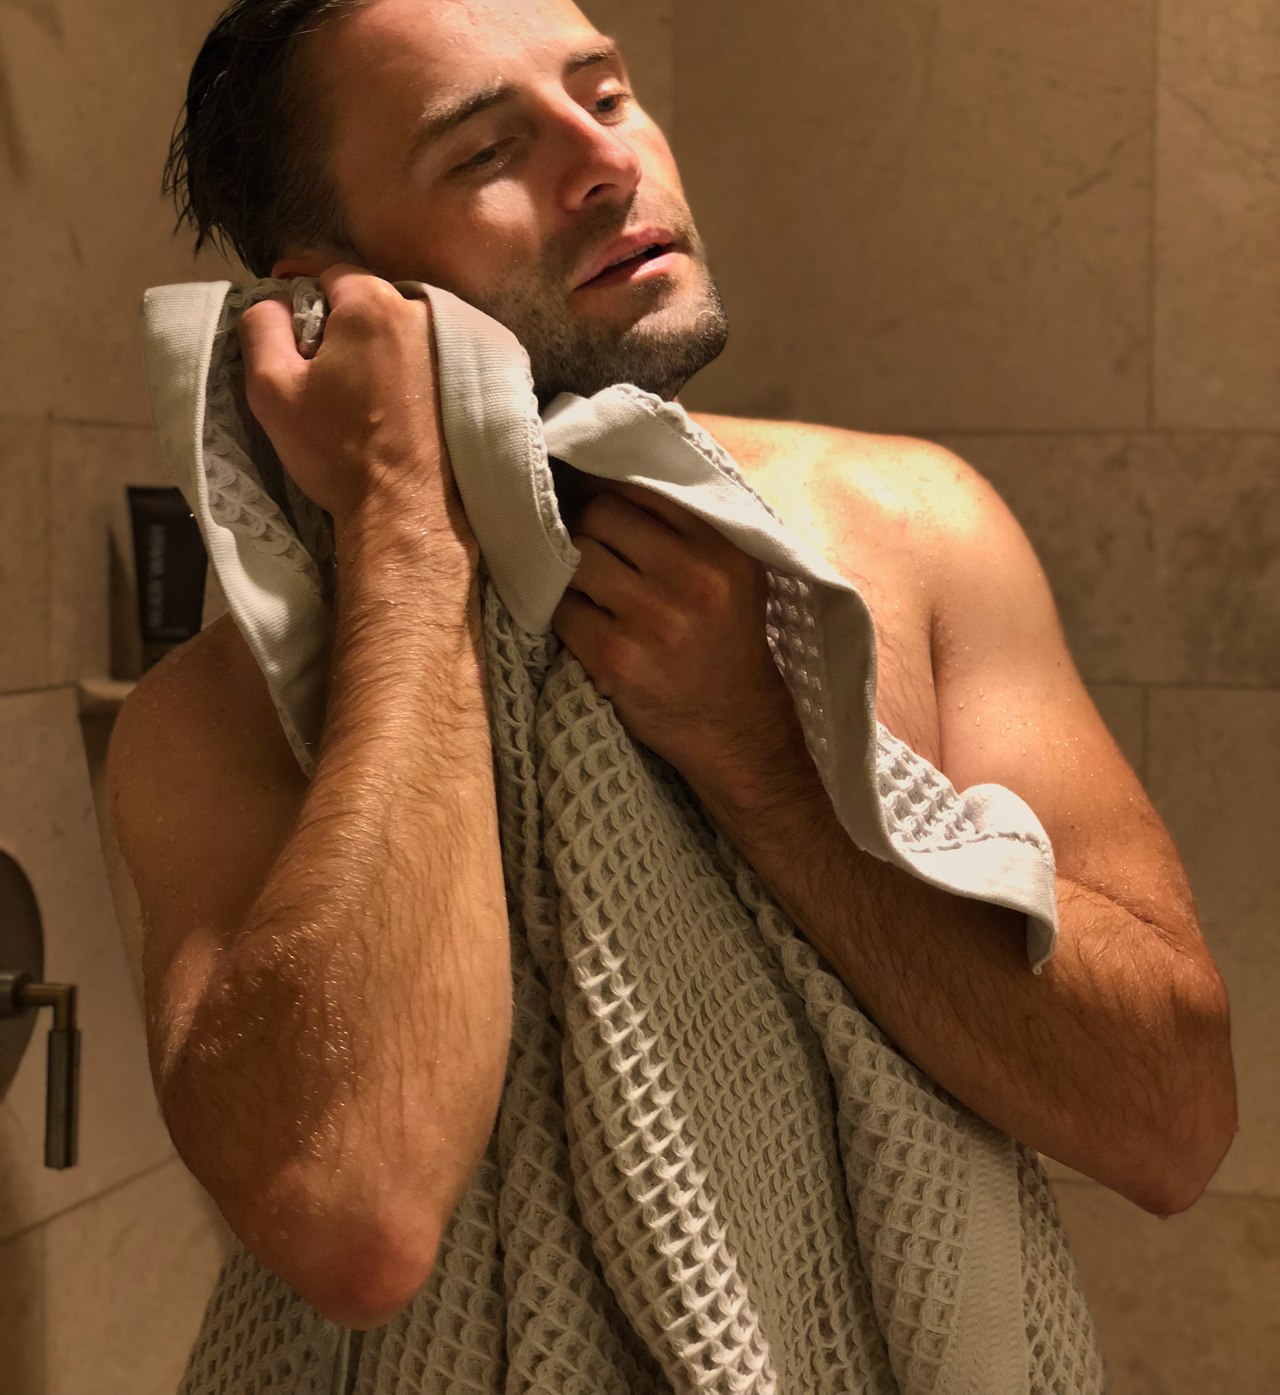 Throw Your Nasty Terry Towel Away. The K-25 Bath Towel is Odor-Free,  Absorbent, and Quick Drying - Yanko Design